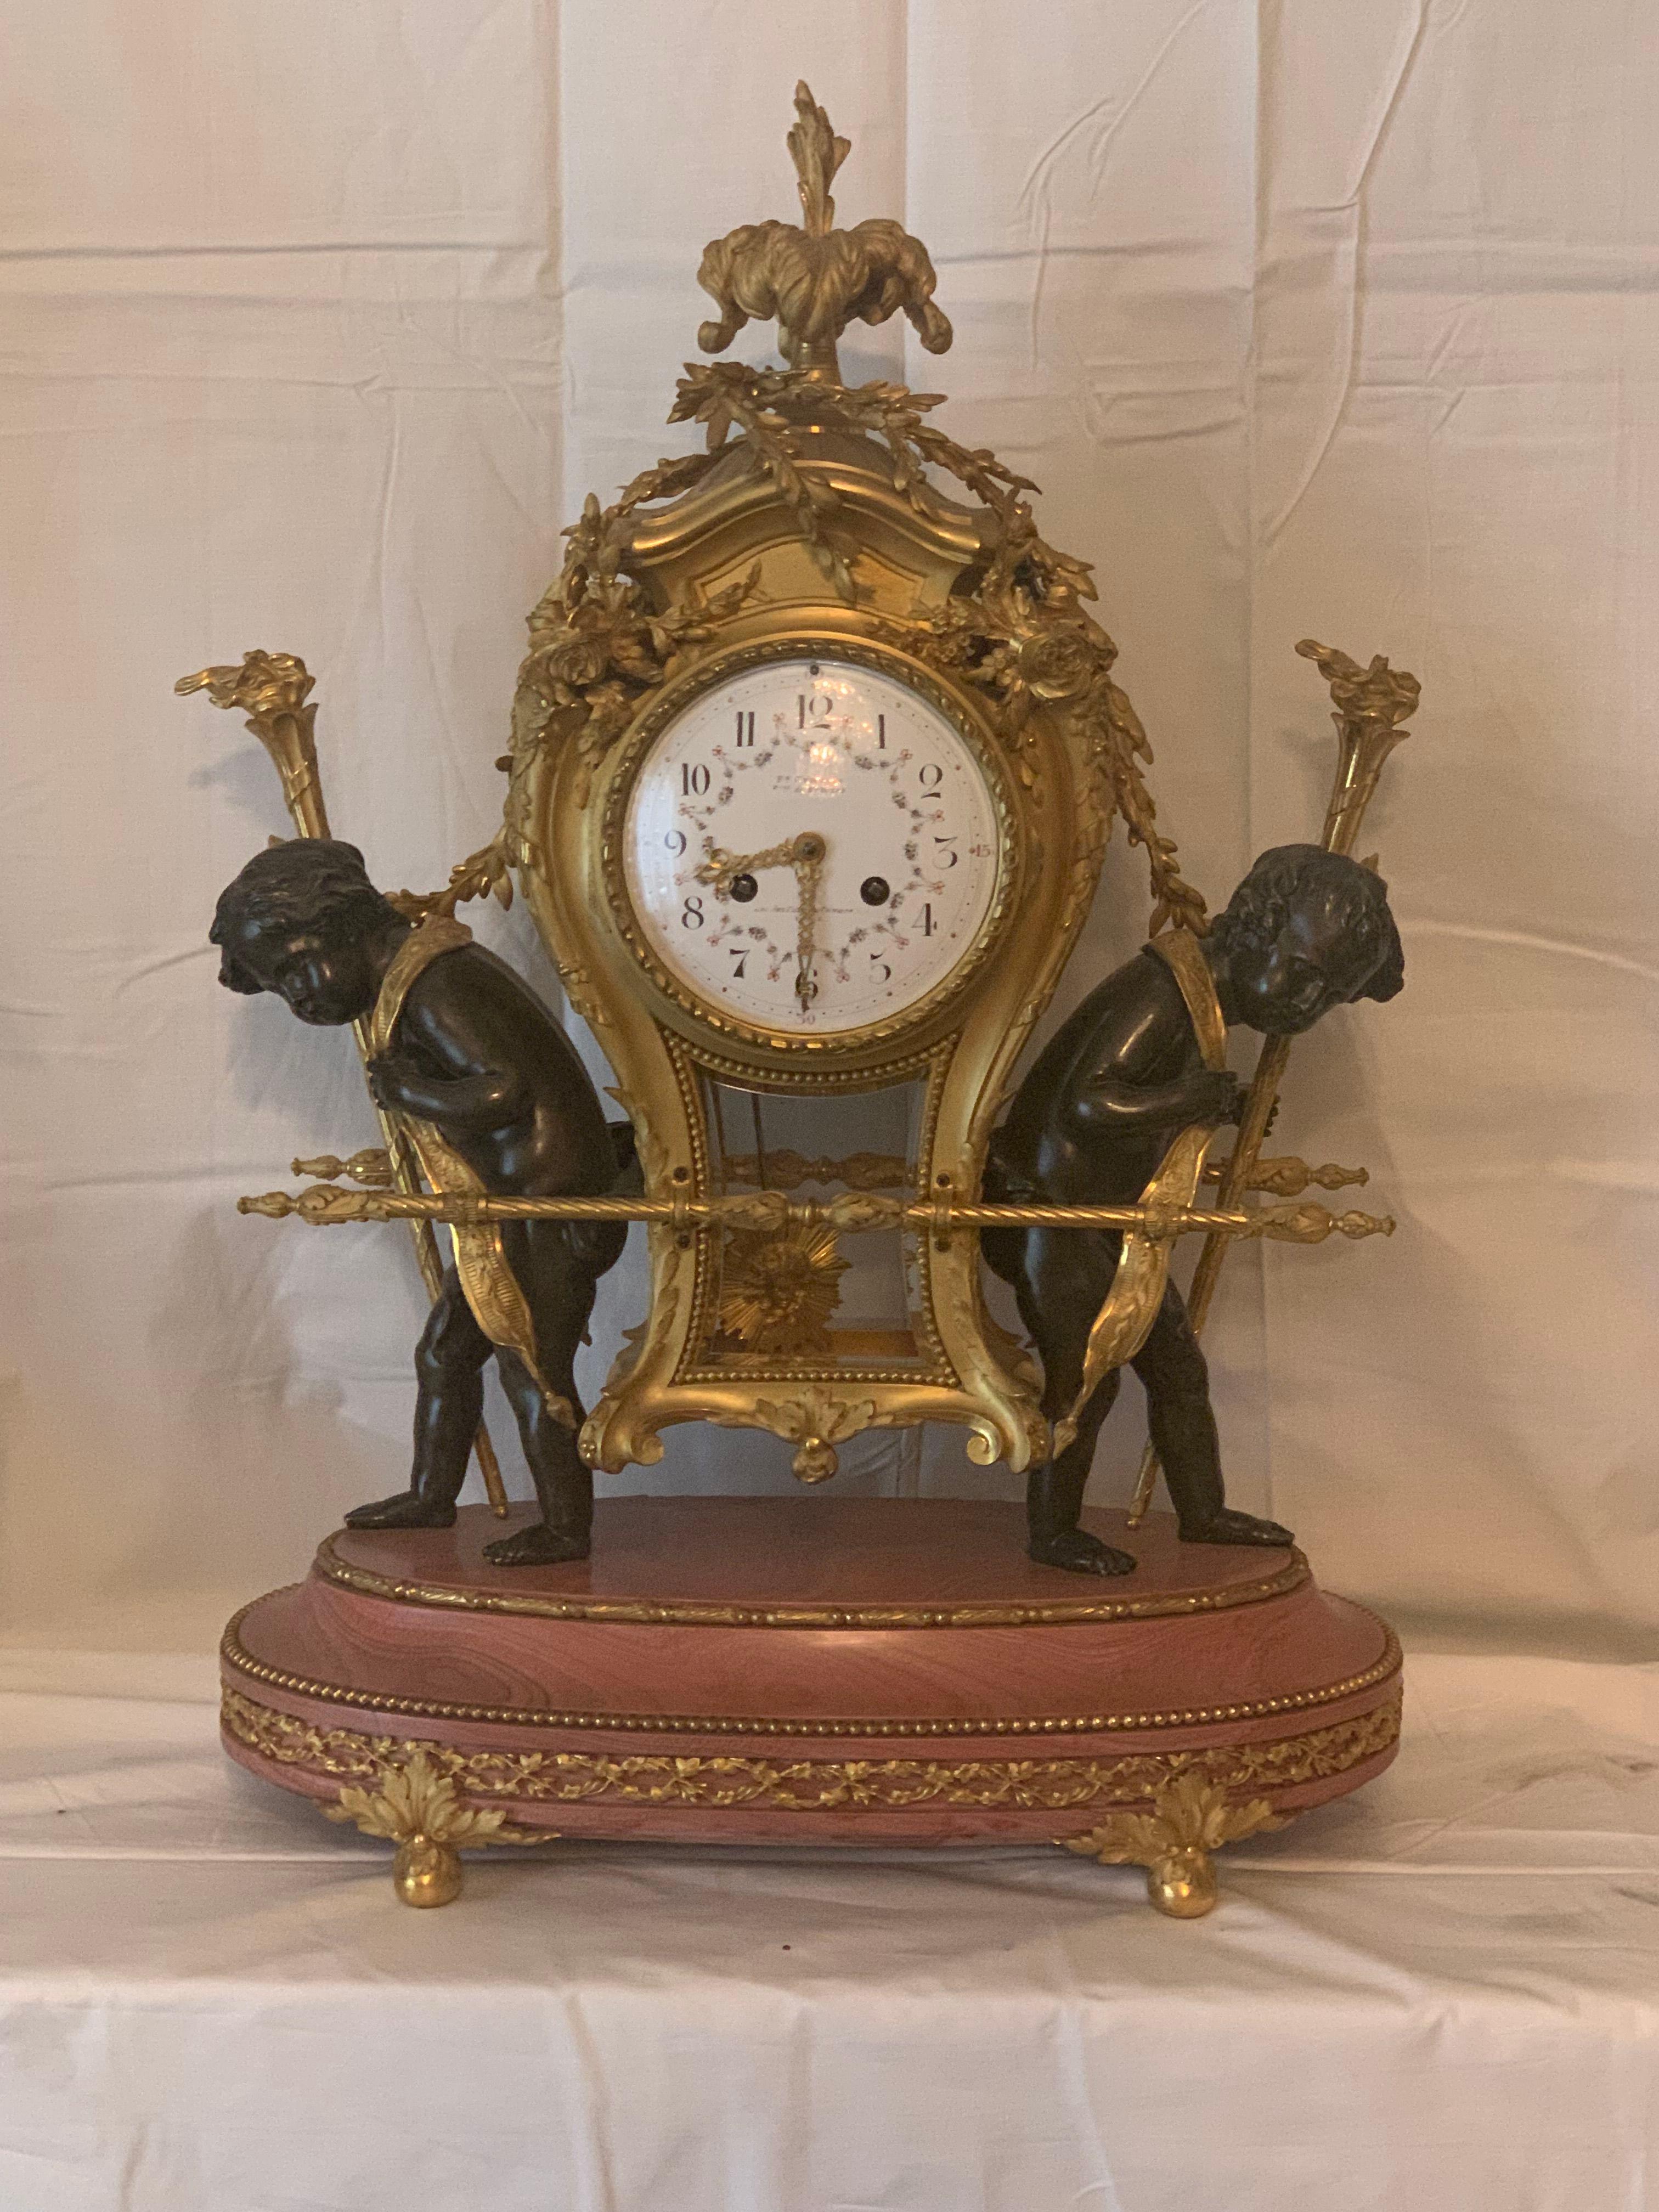 Truly unique clock set in pink marble and bronze decorative piece of art
the clock is modelled in the image of an 18 century sedan chair that is covered chair sat in by a member of the social elite, which was carried on poles by two people.This